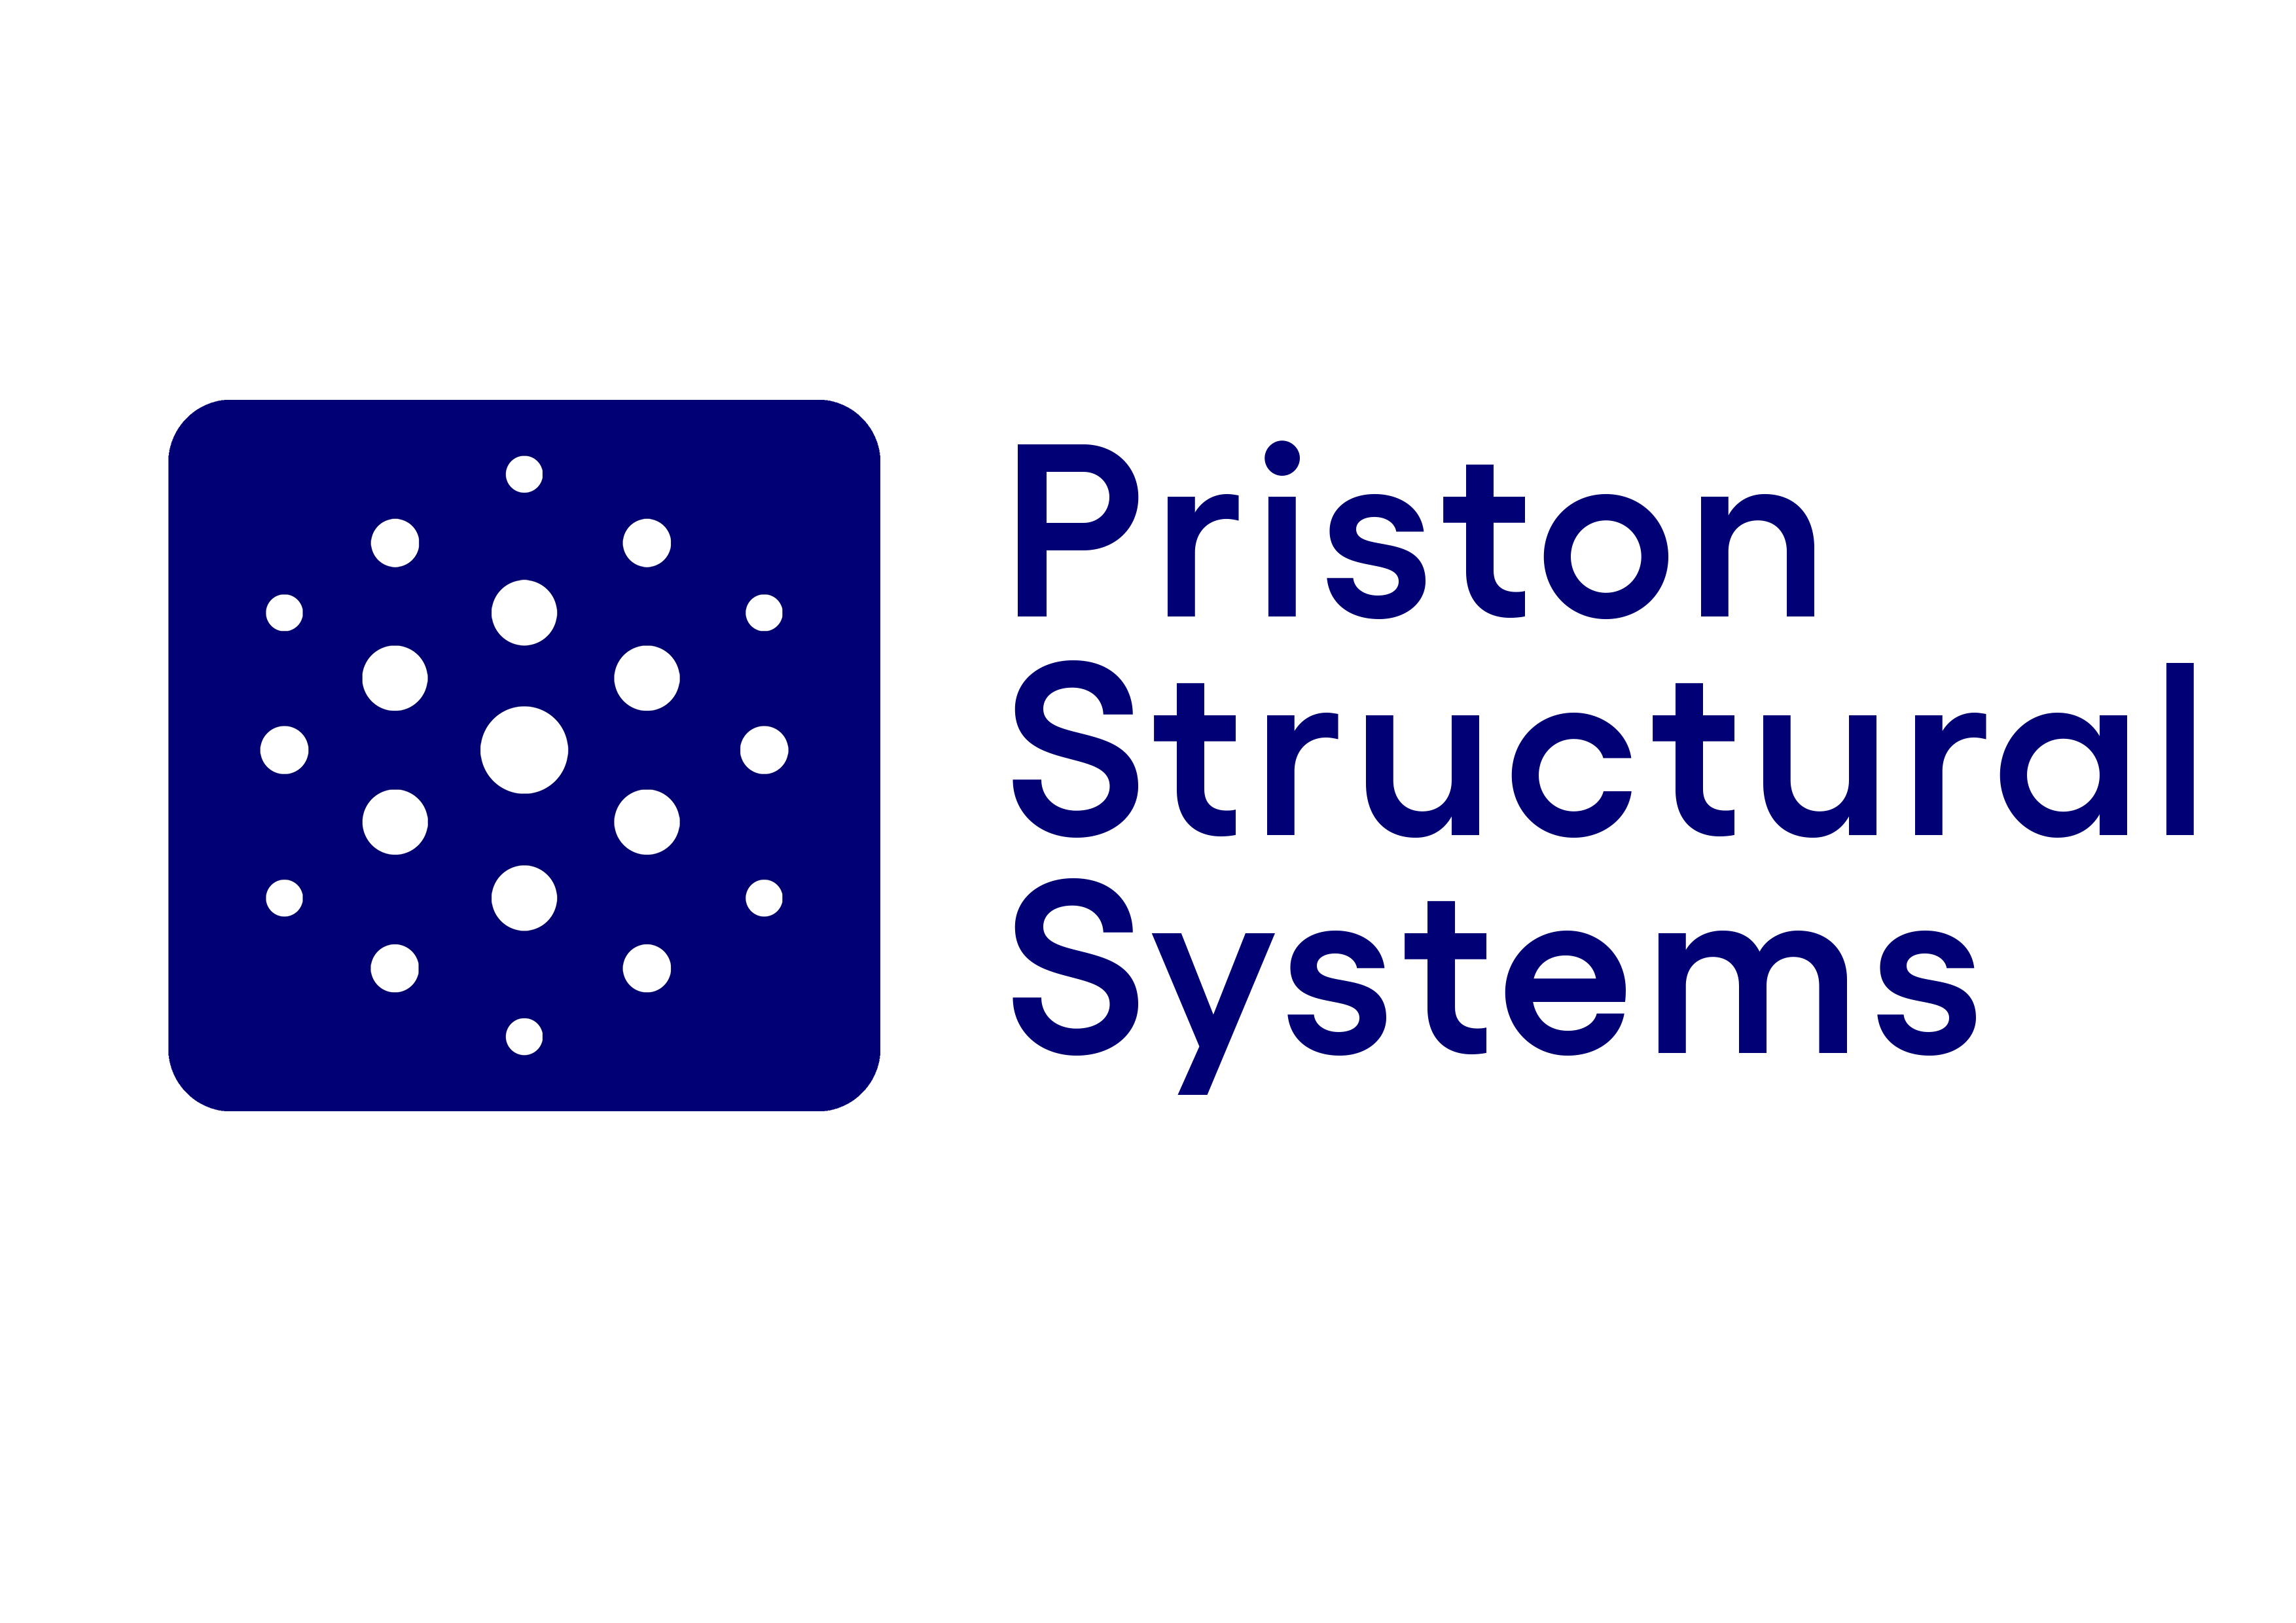 Steel Structure Systems